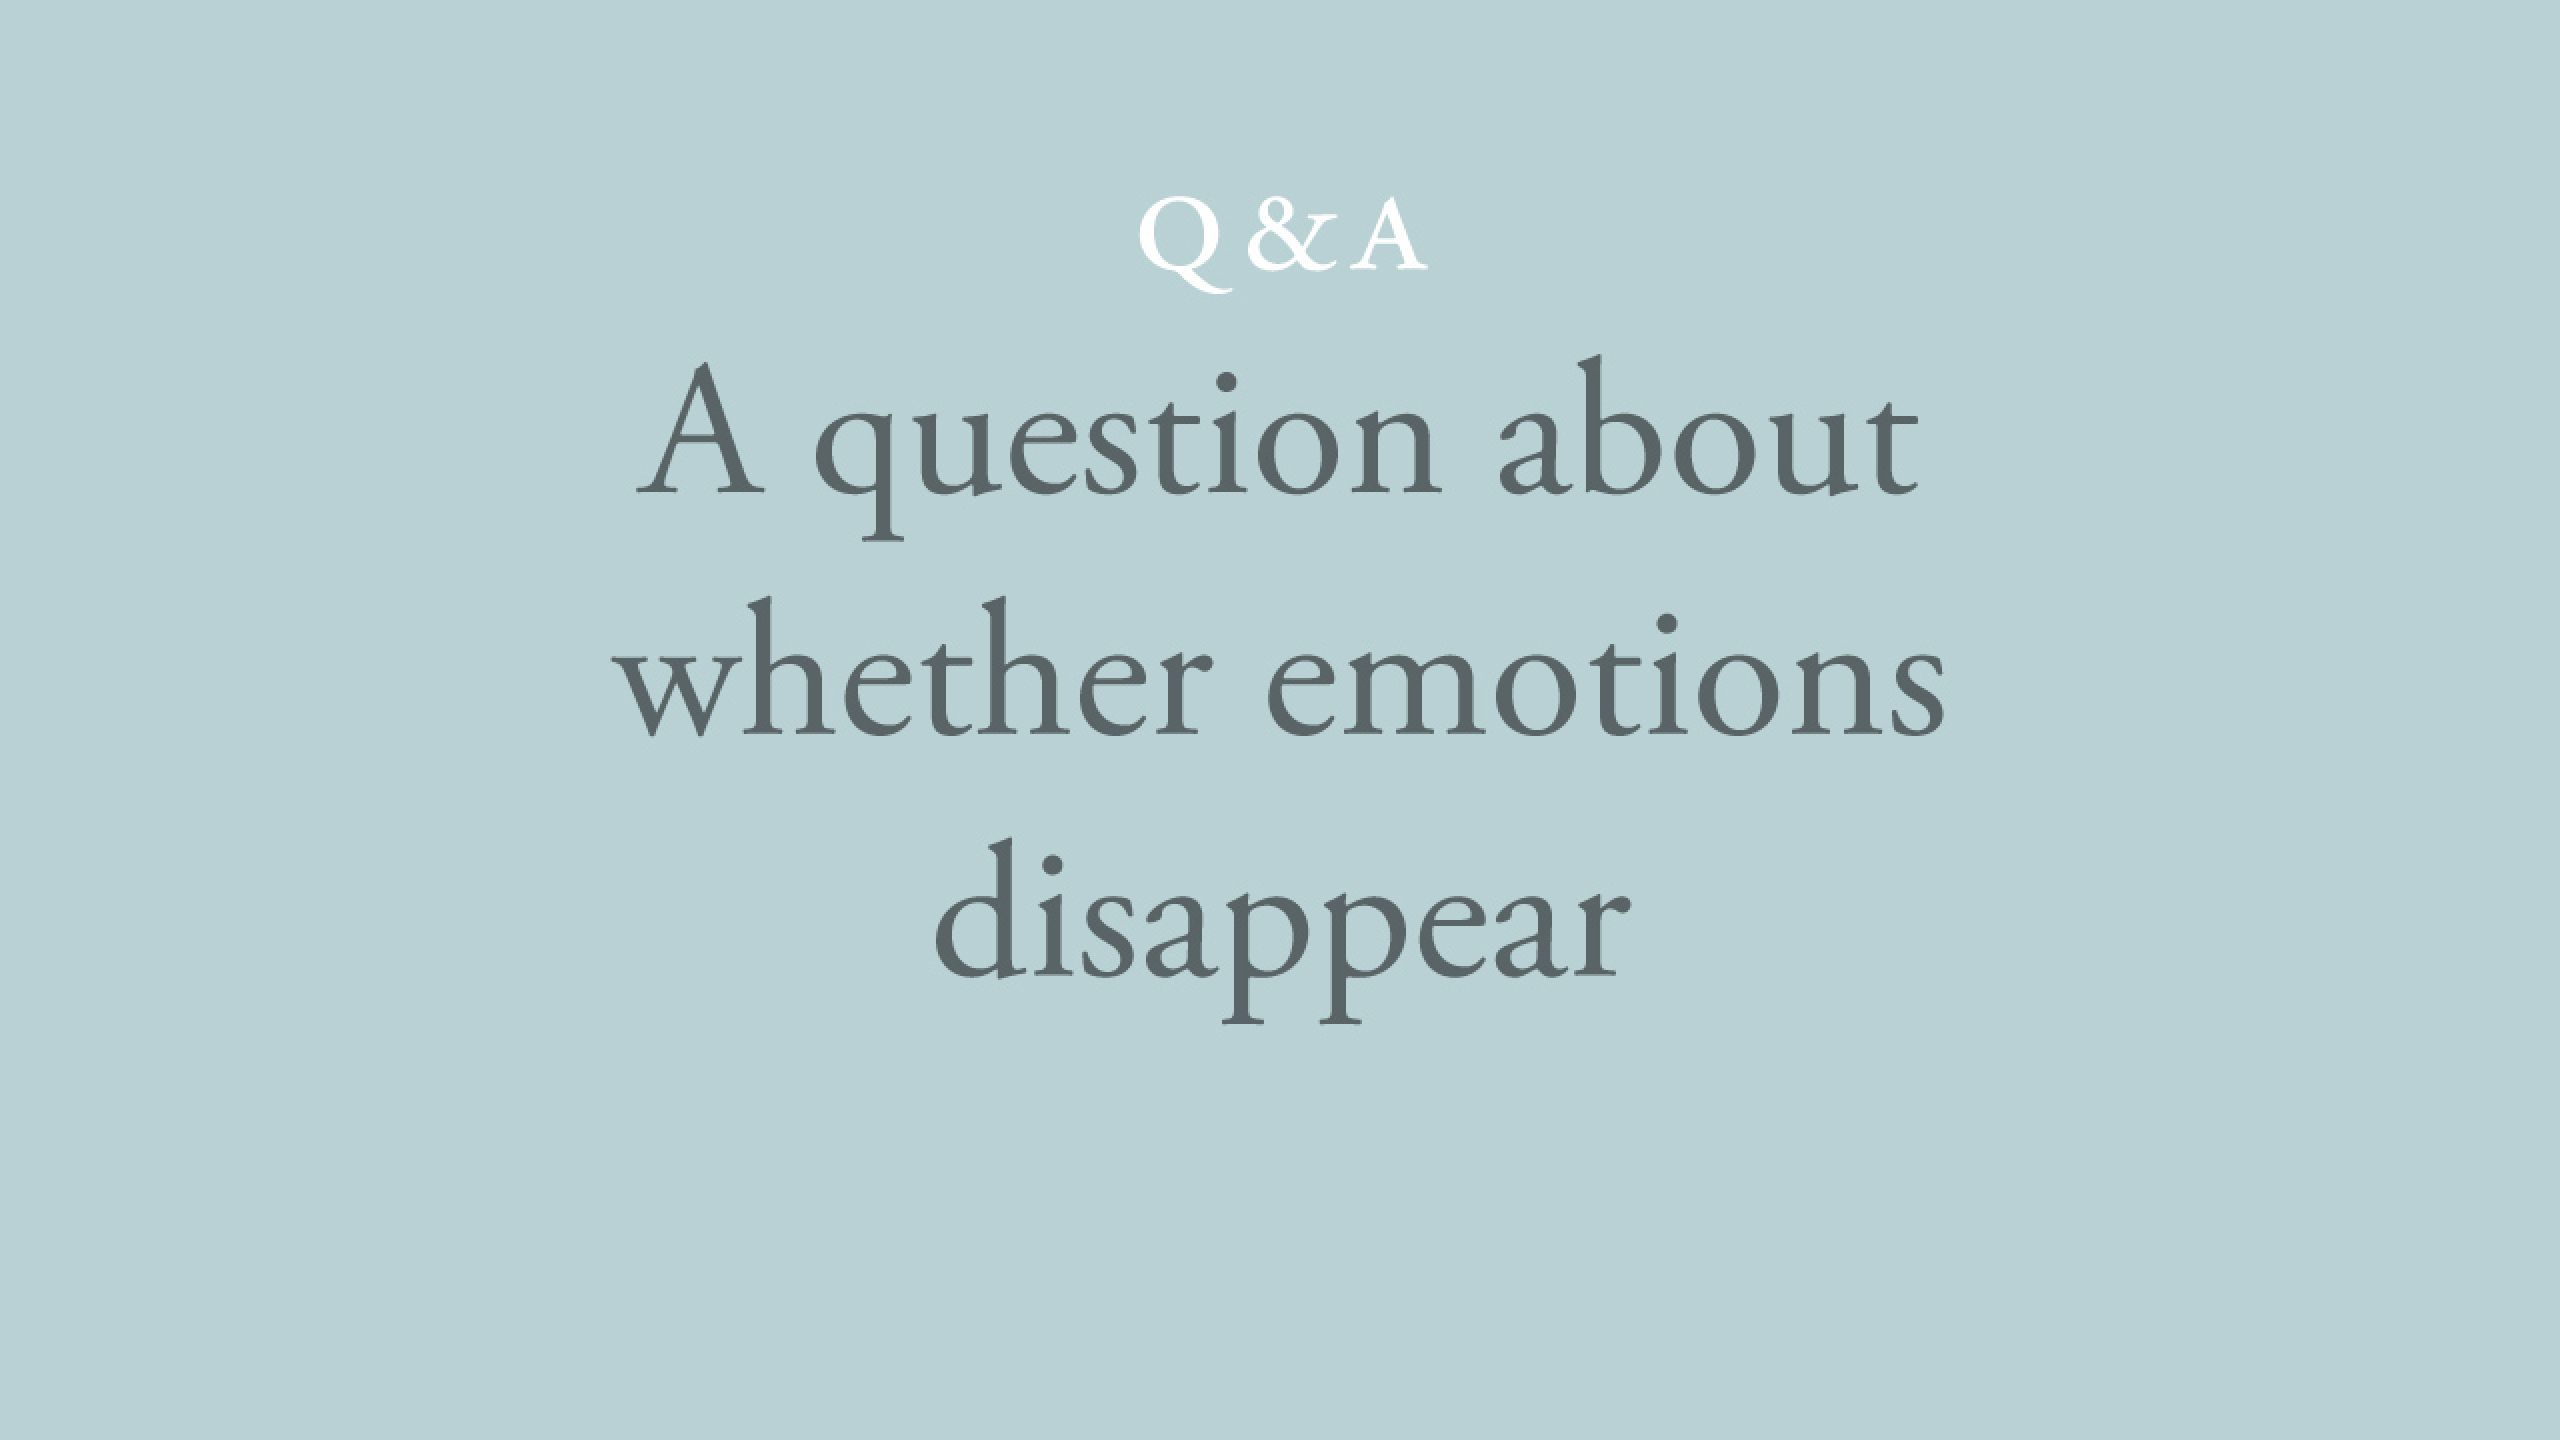 Do emotions such as irritation, sorrow and regret disappear with understanding?